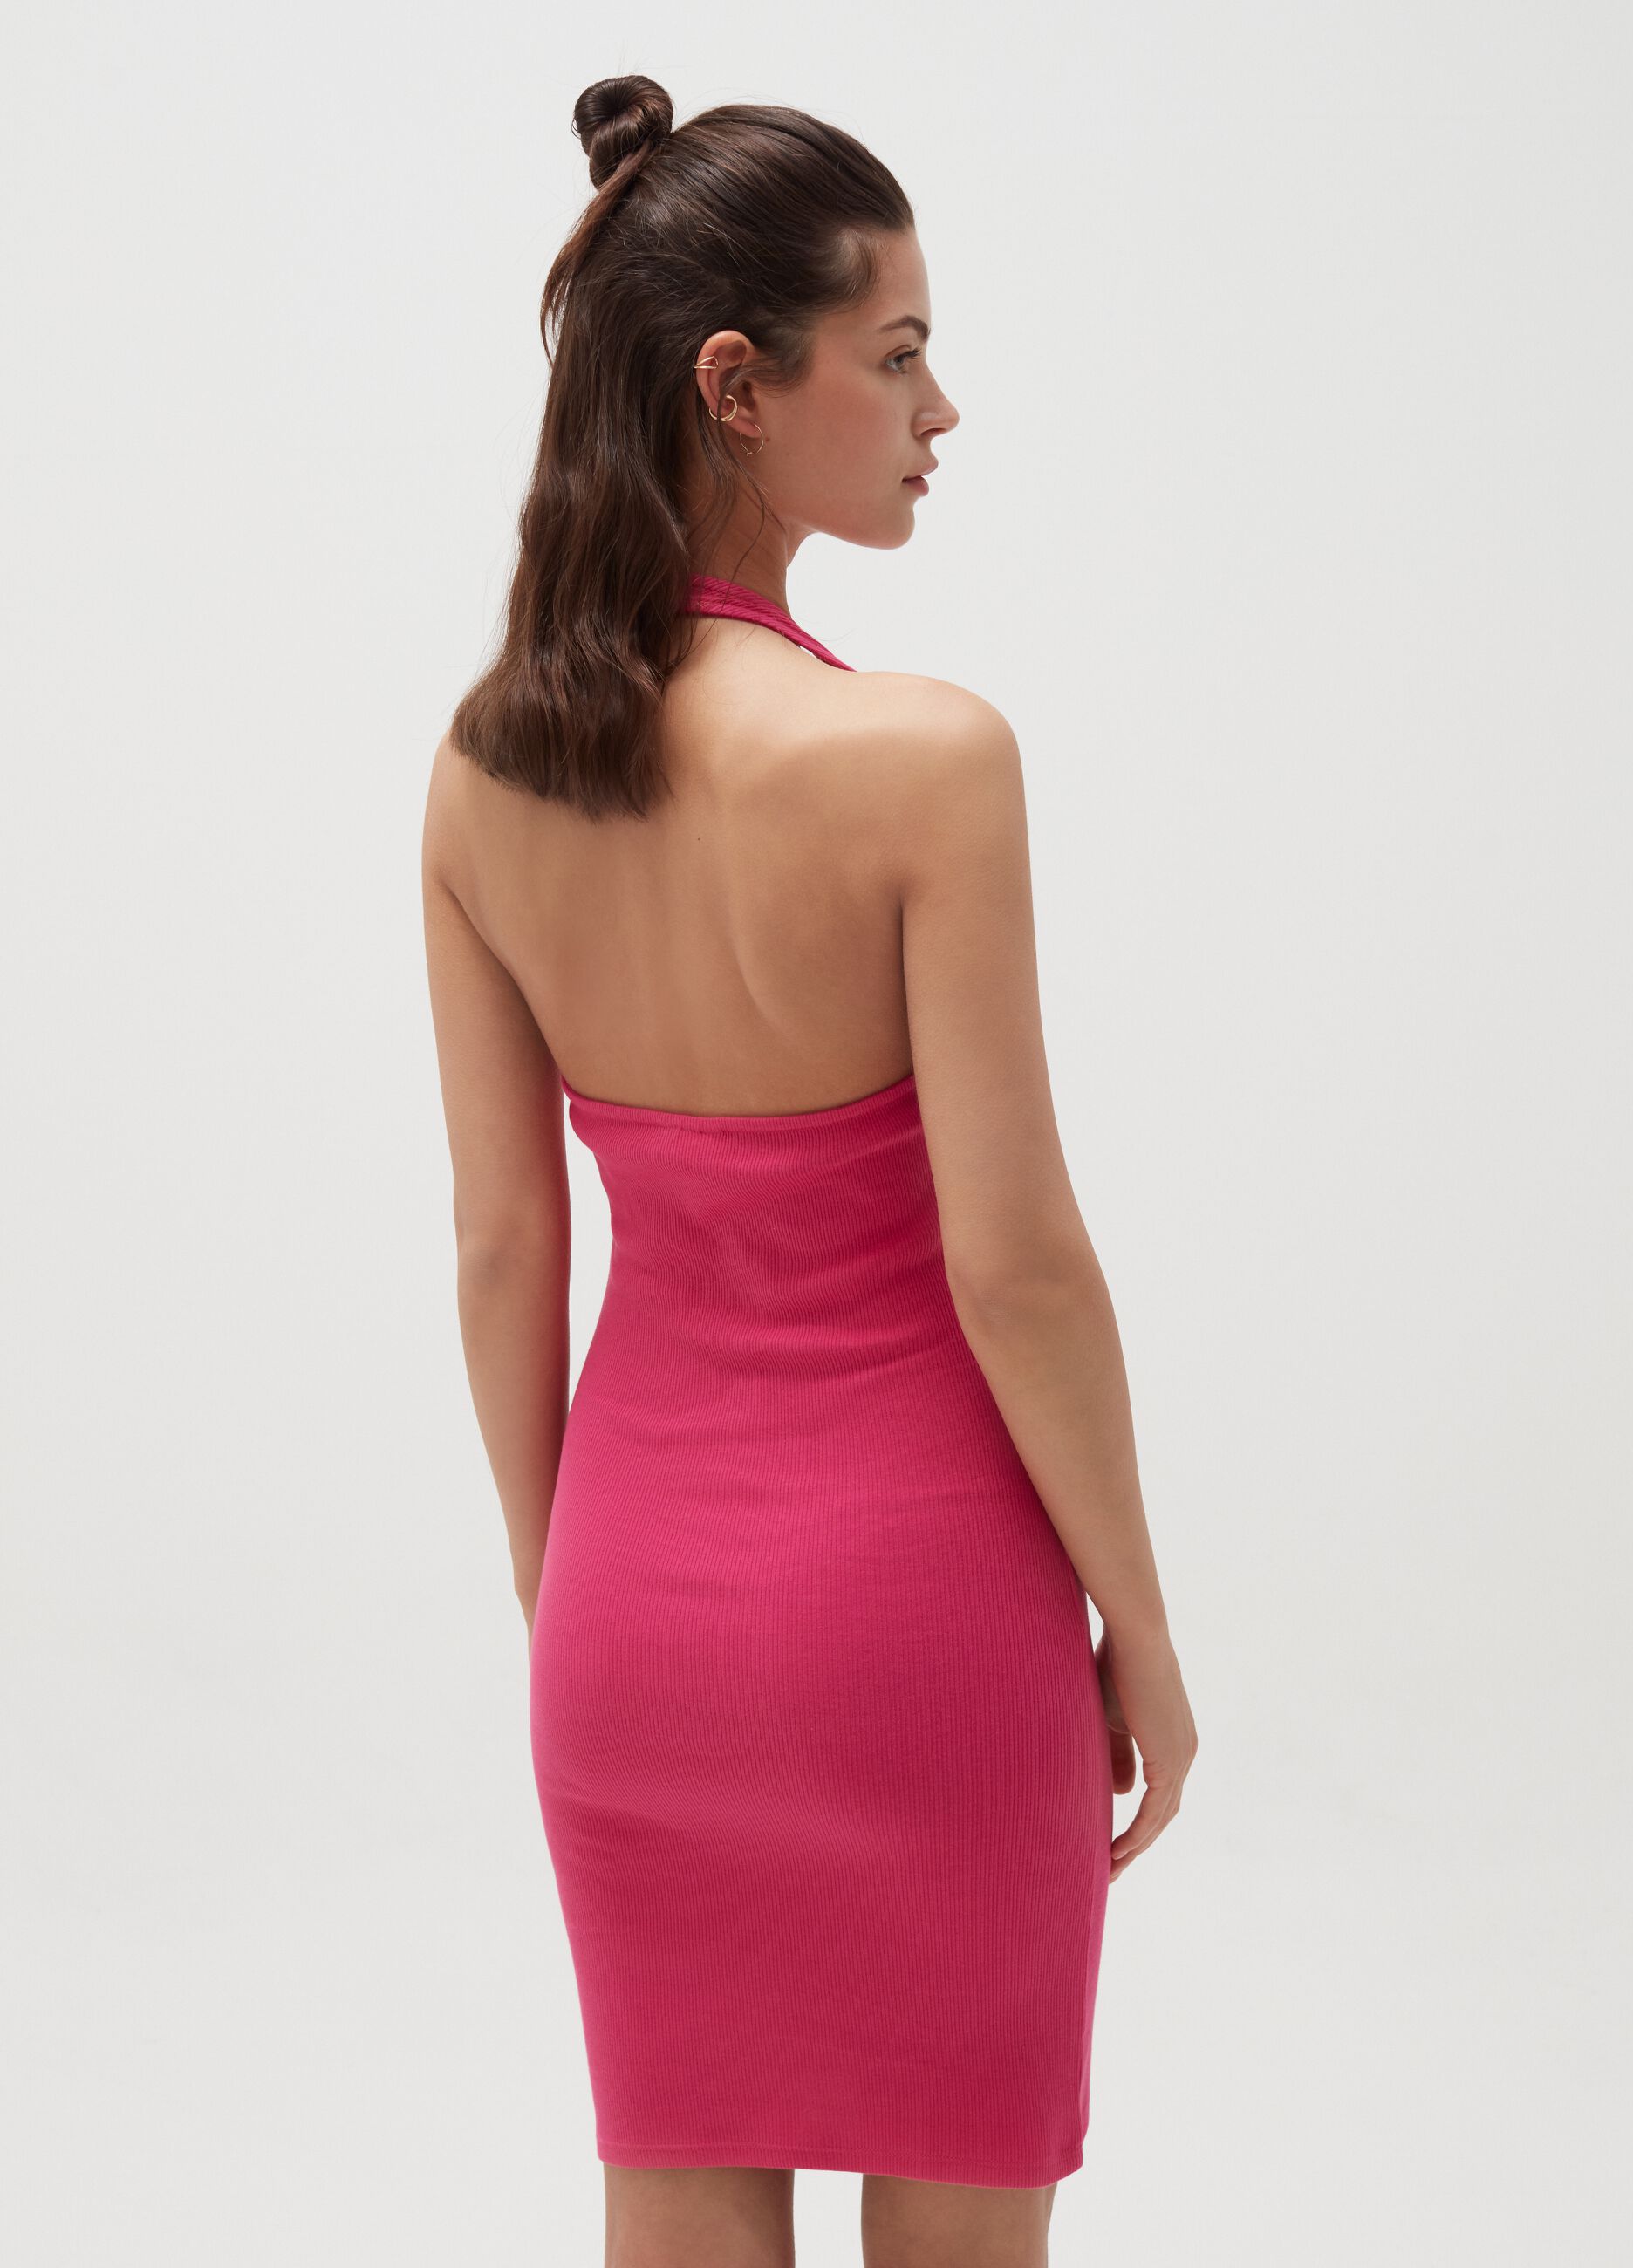 Maui and Sons ribbed stretch dress 